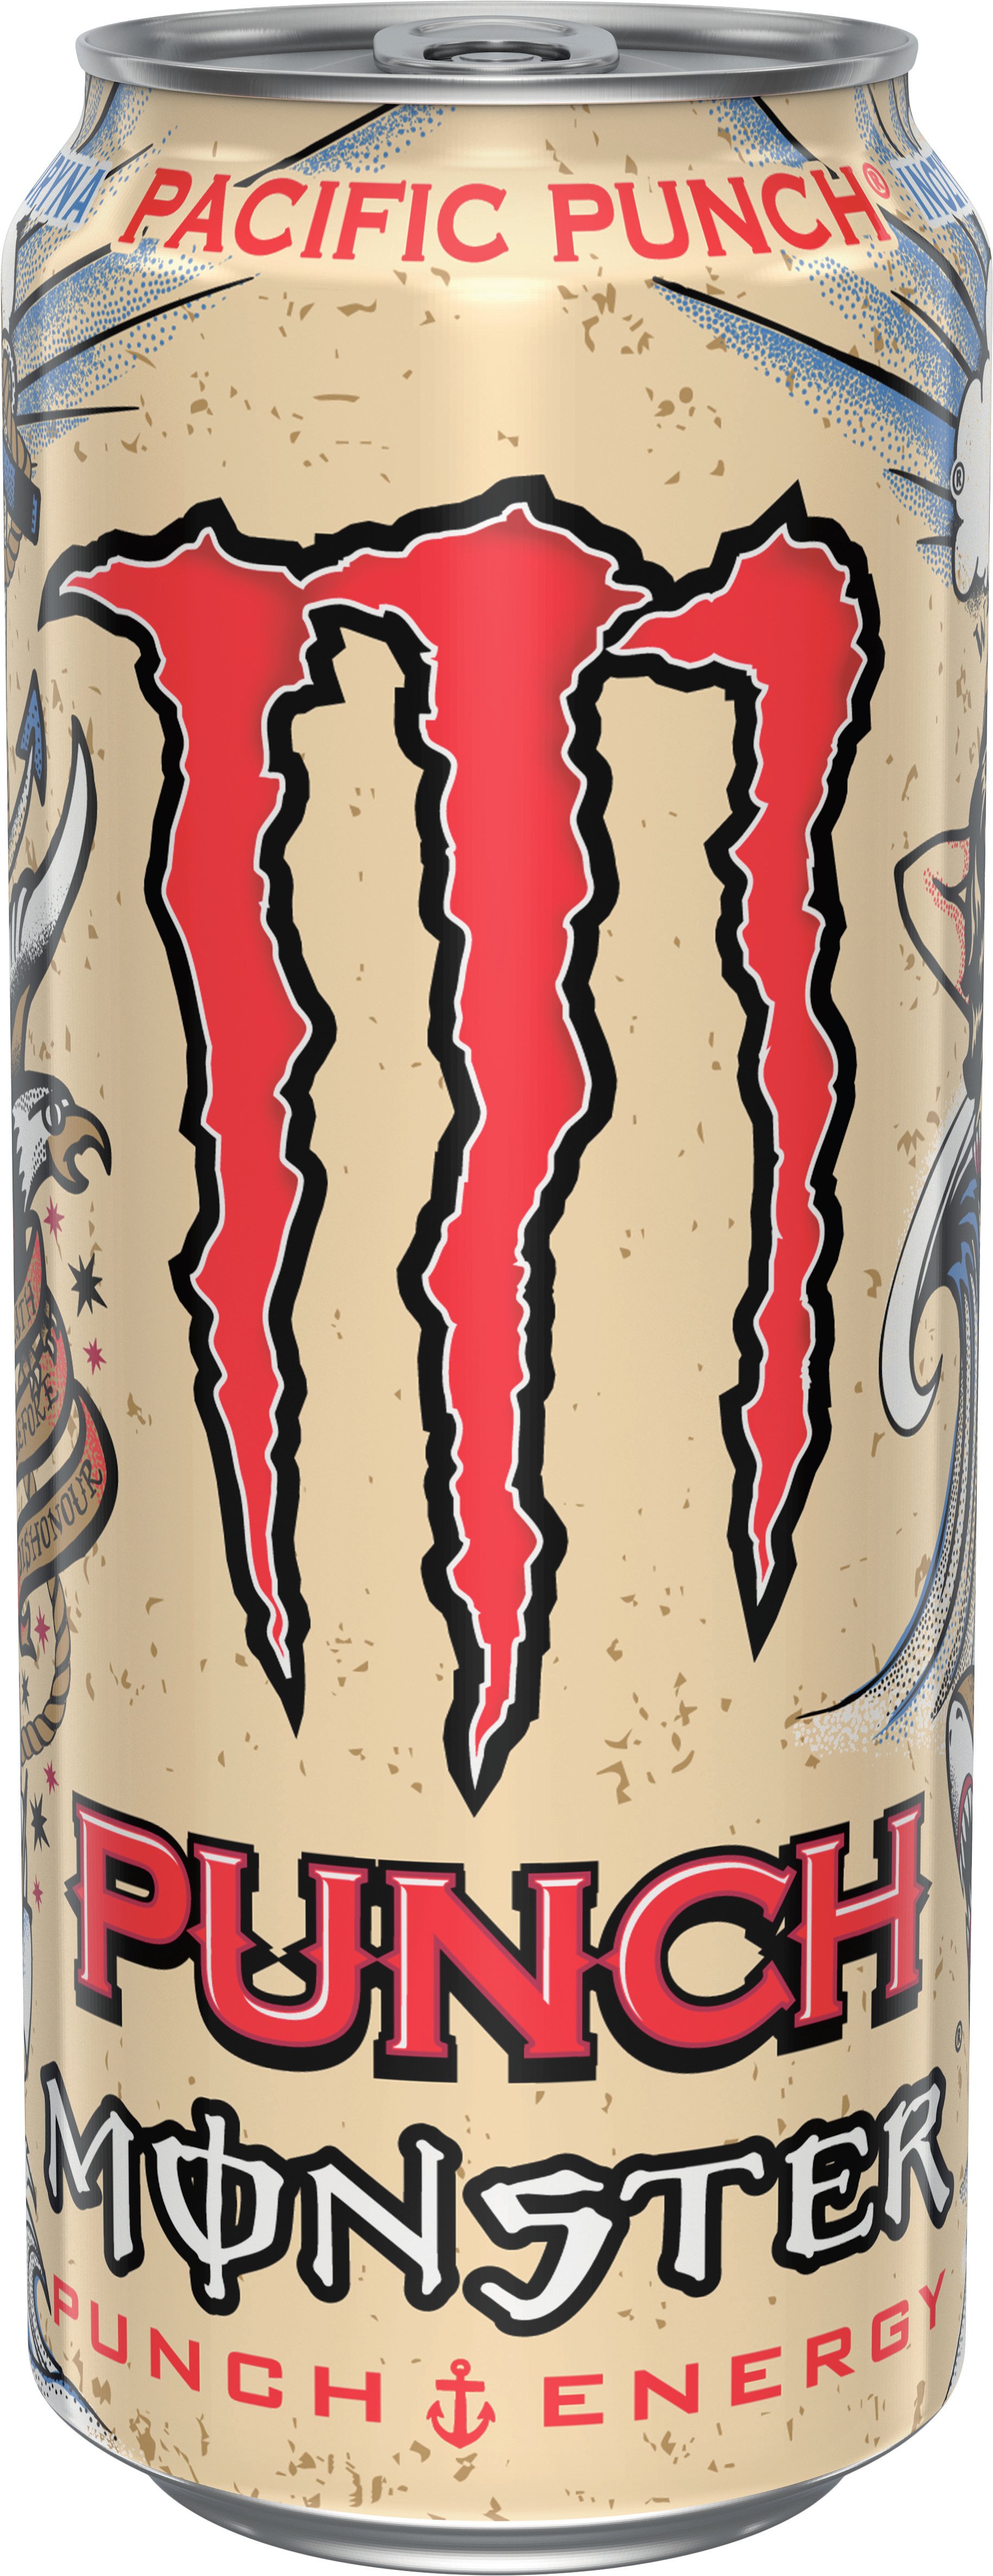 Monster_Pacific_Punch_500ml_Can_Hires